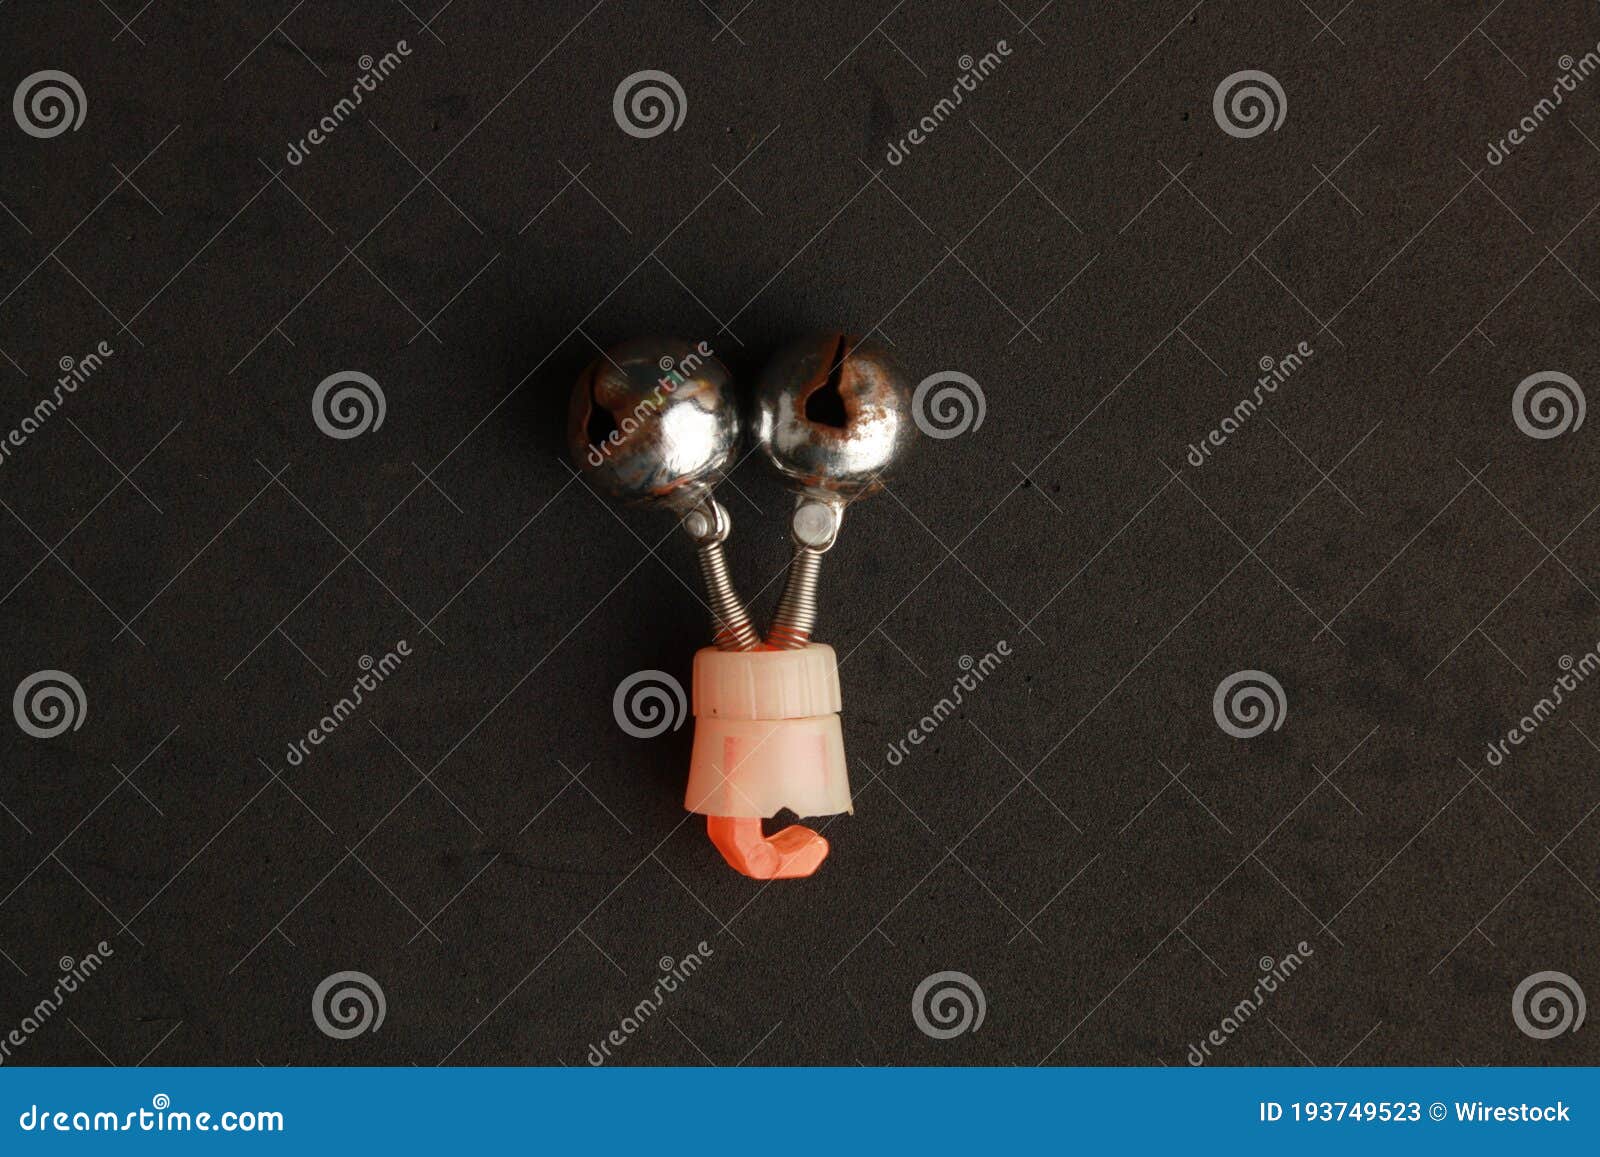 Overhead Closeup Shot of a Fishing Rattle for Fishing Rods on a Black  Background Stock Image - Image of anchor, hobby: 193749523